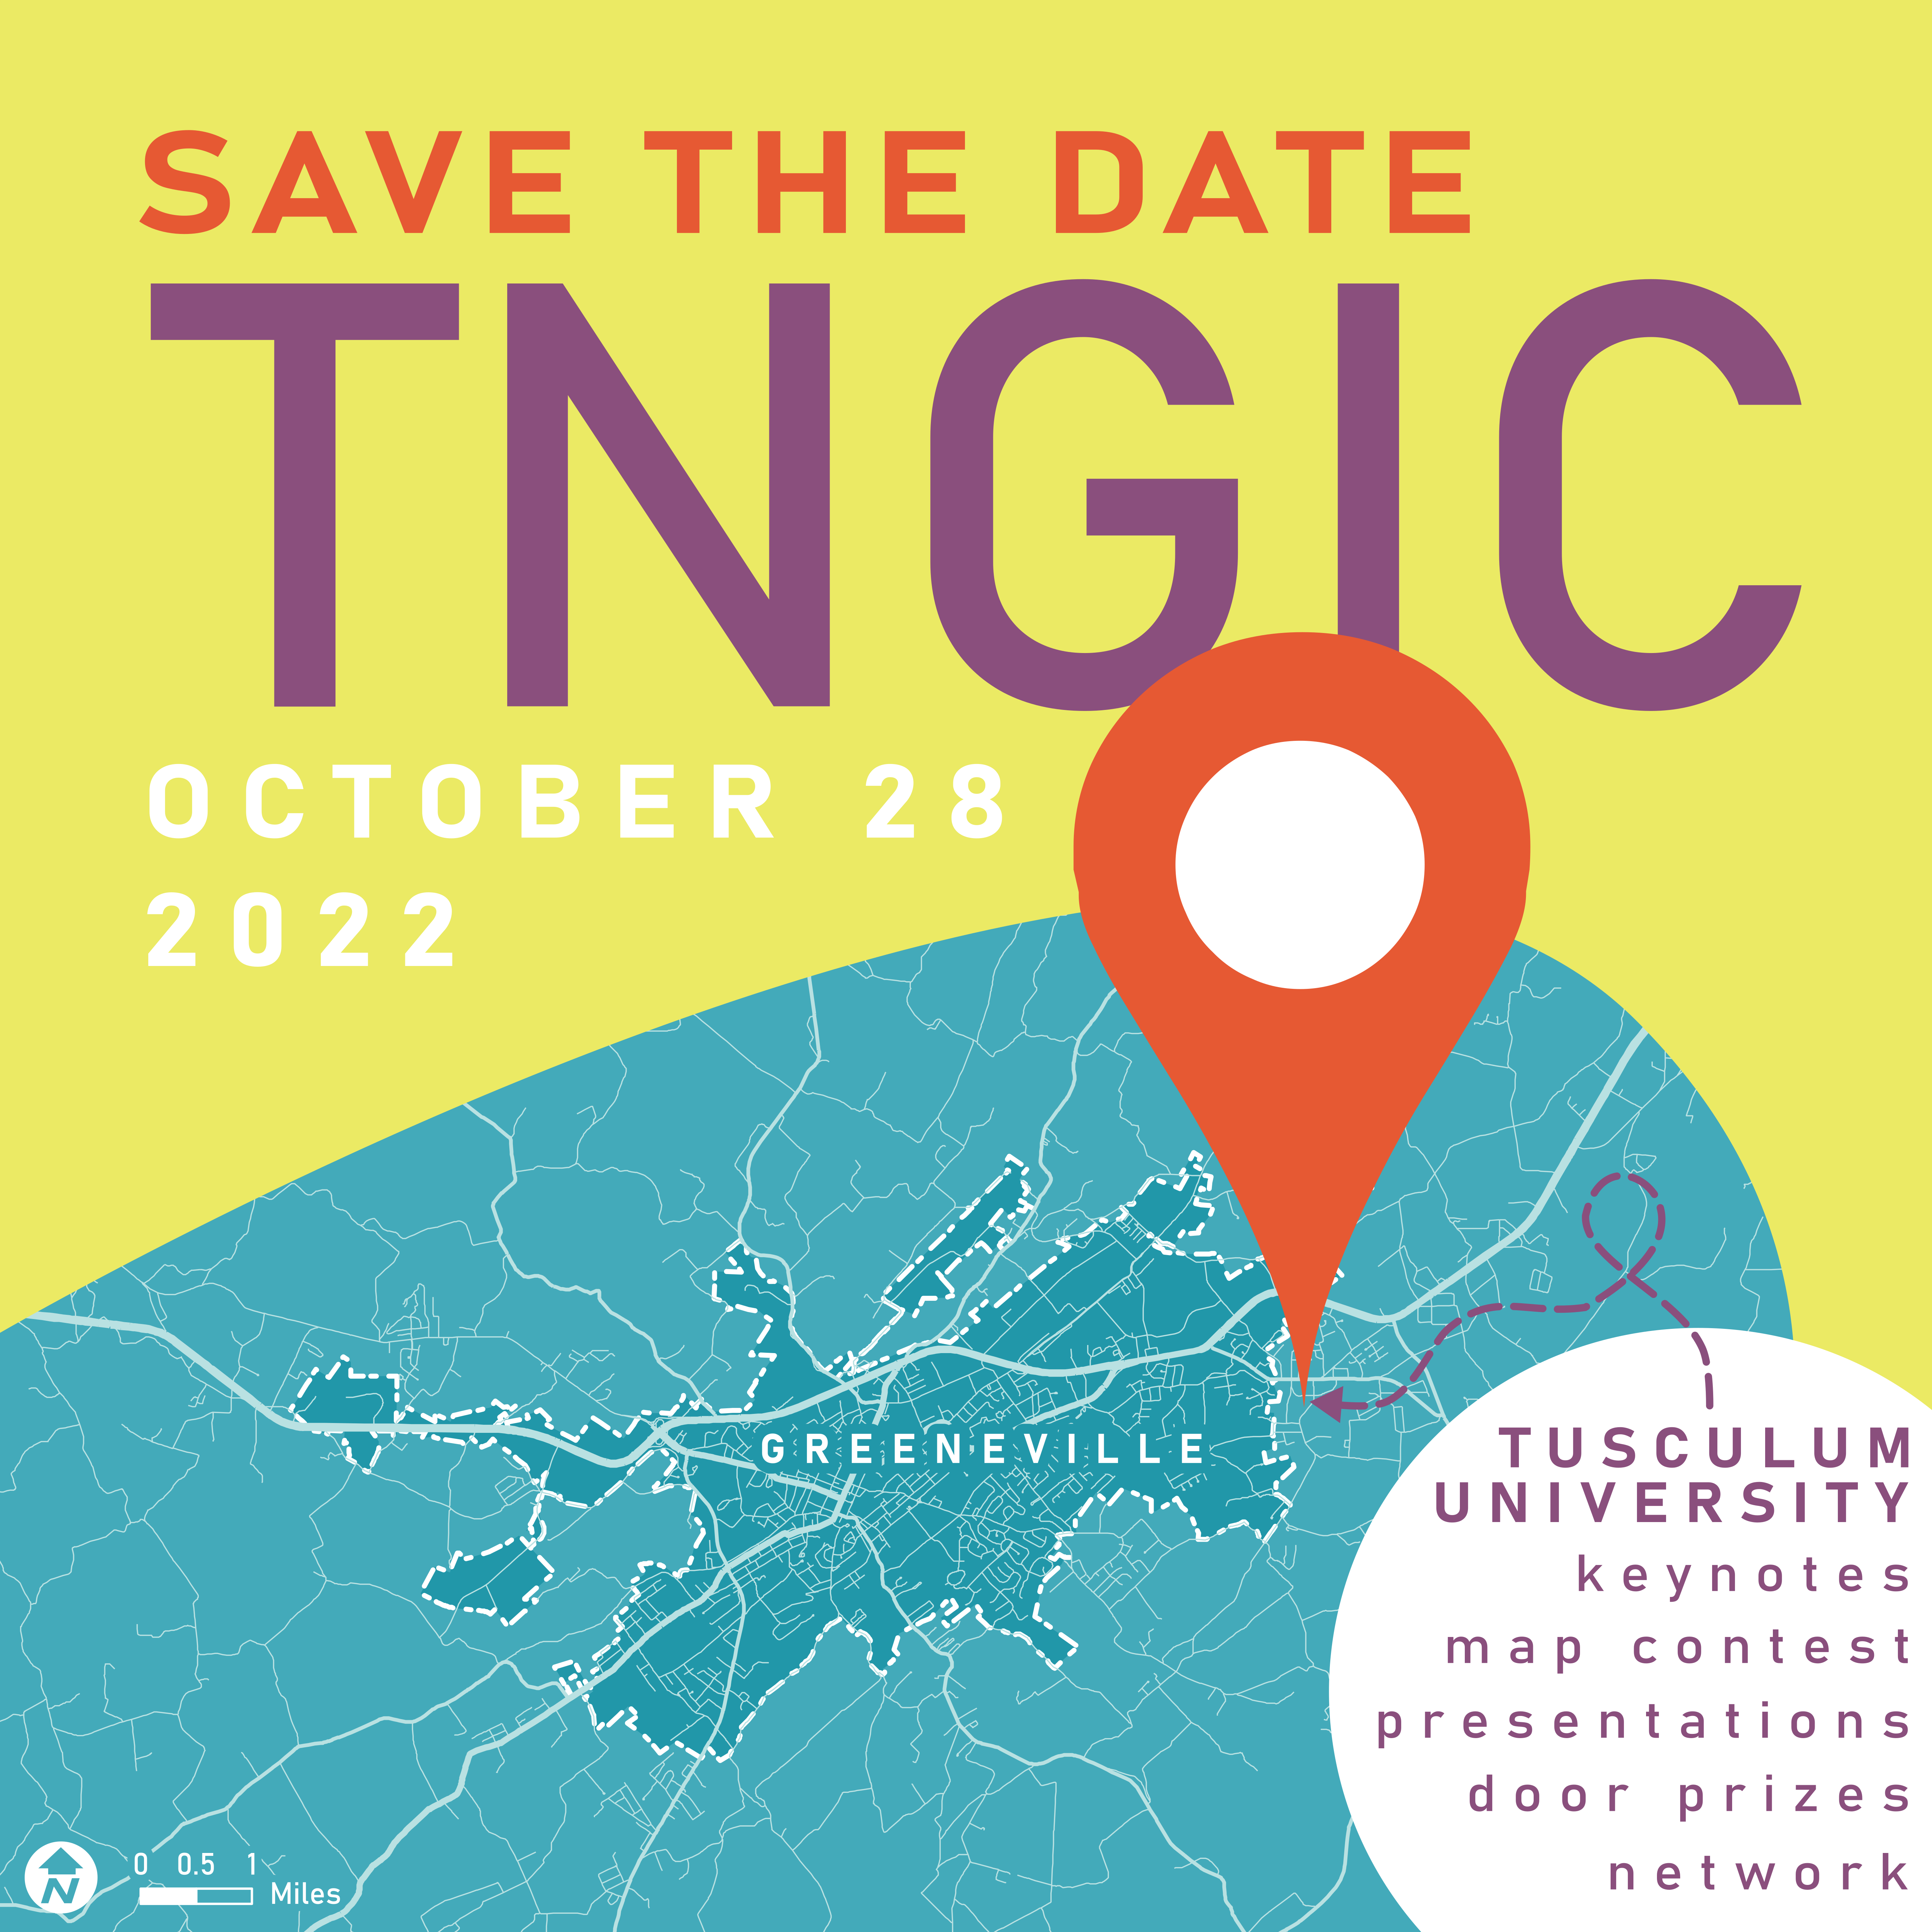 Save the date graphic for the fall 2022 TNGIC east fall forum